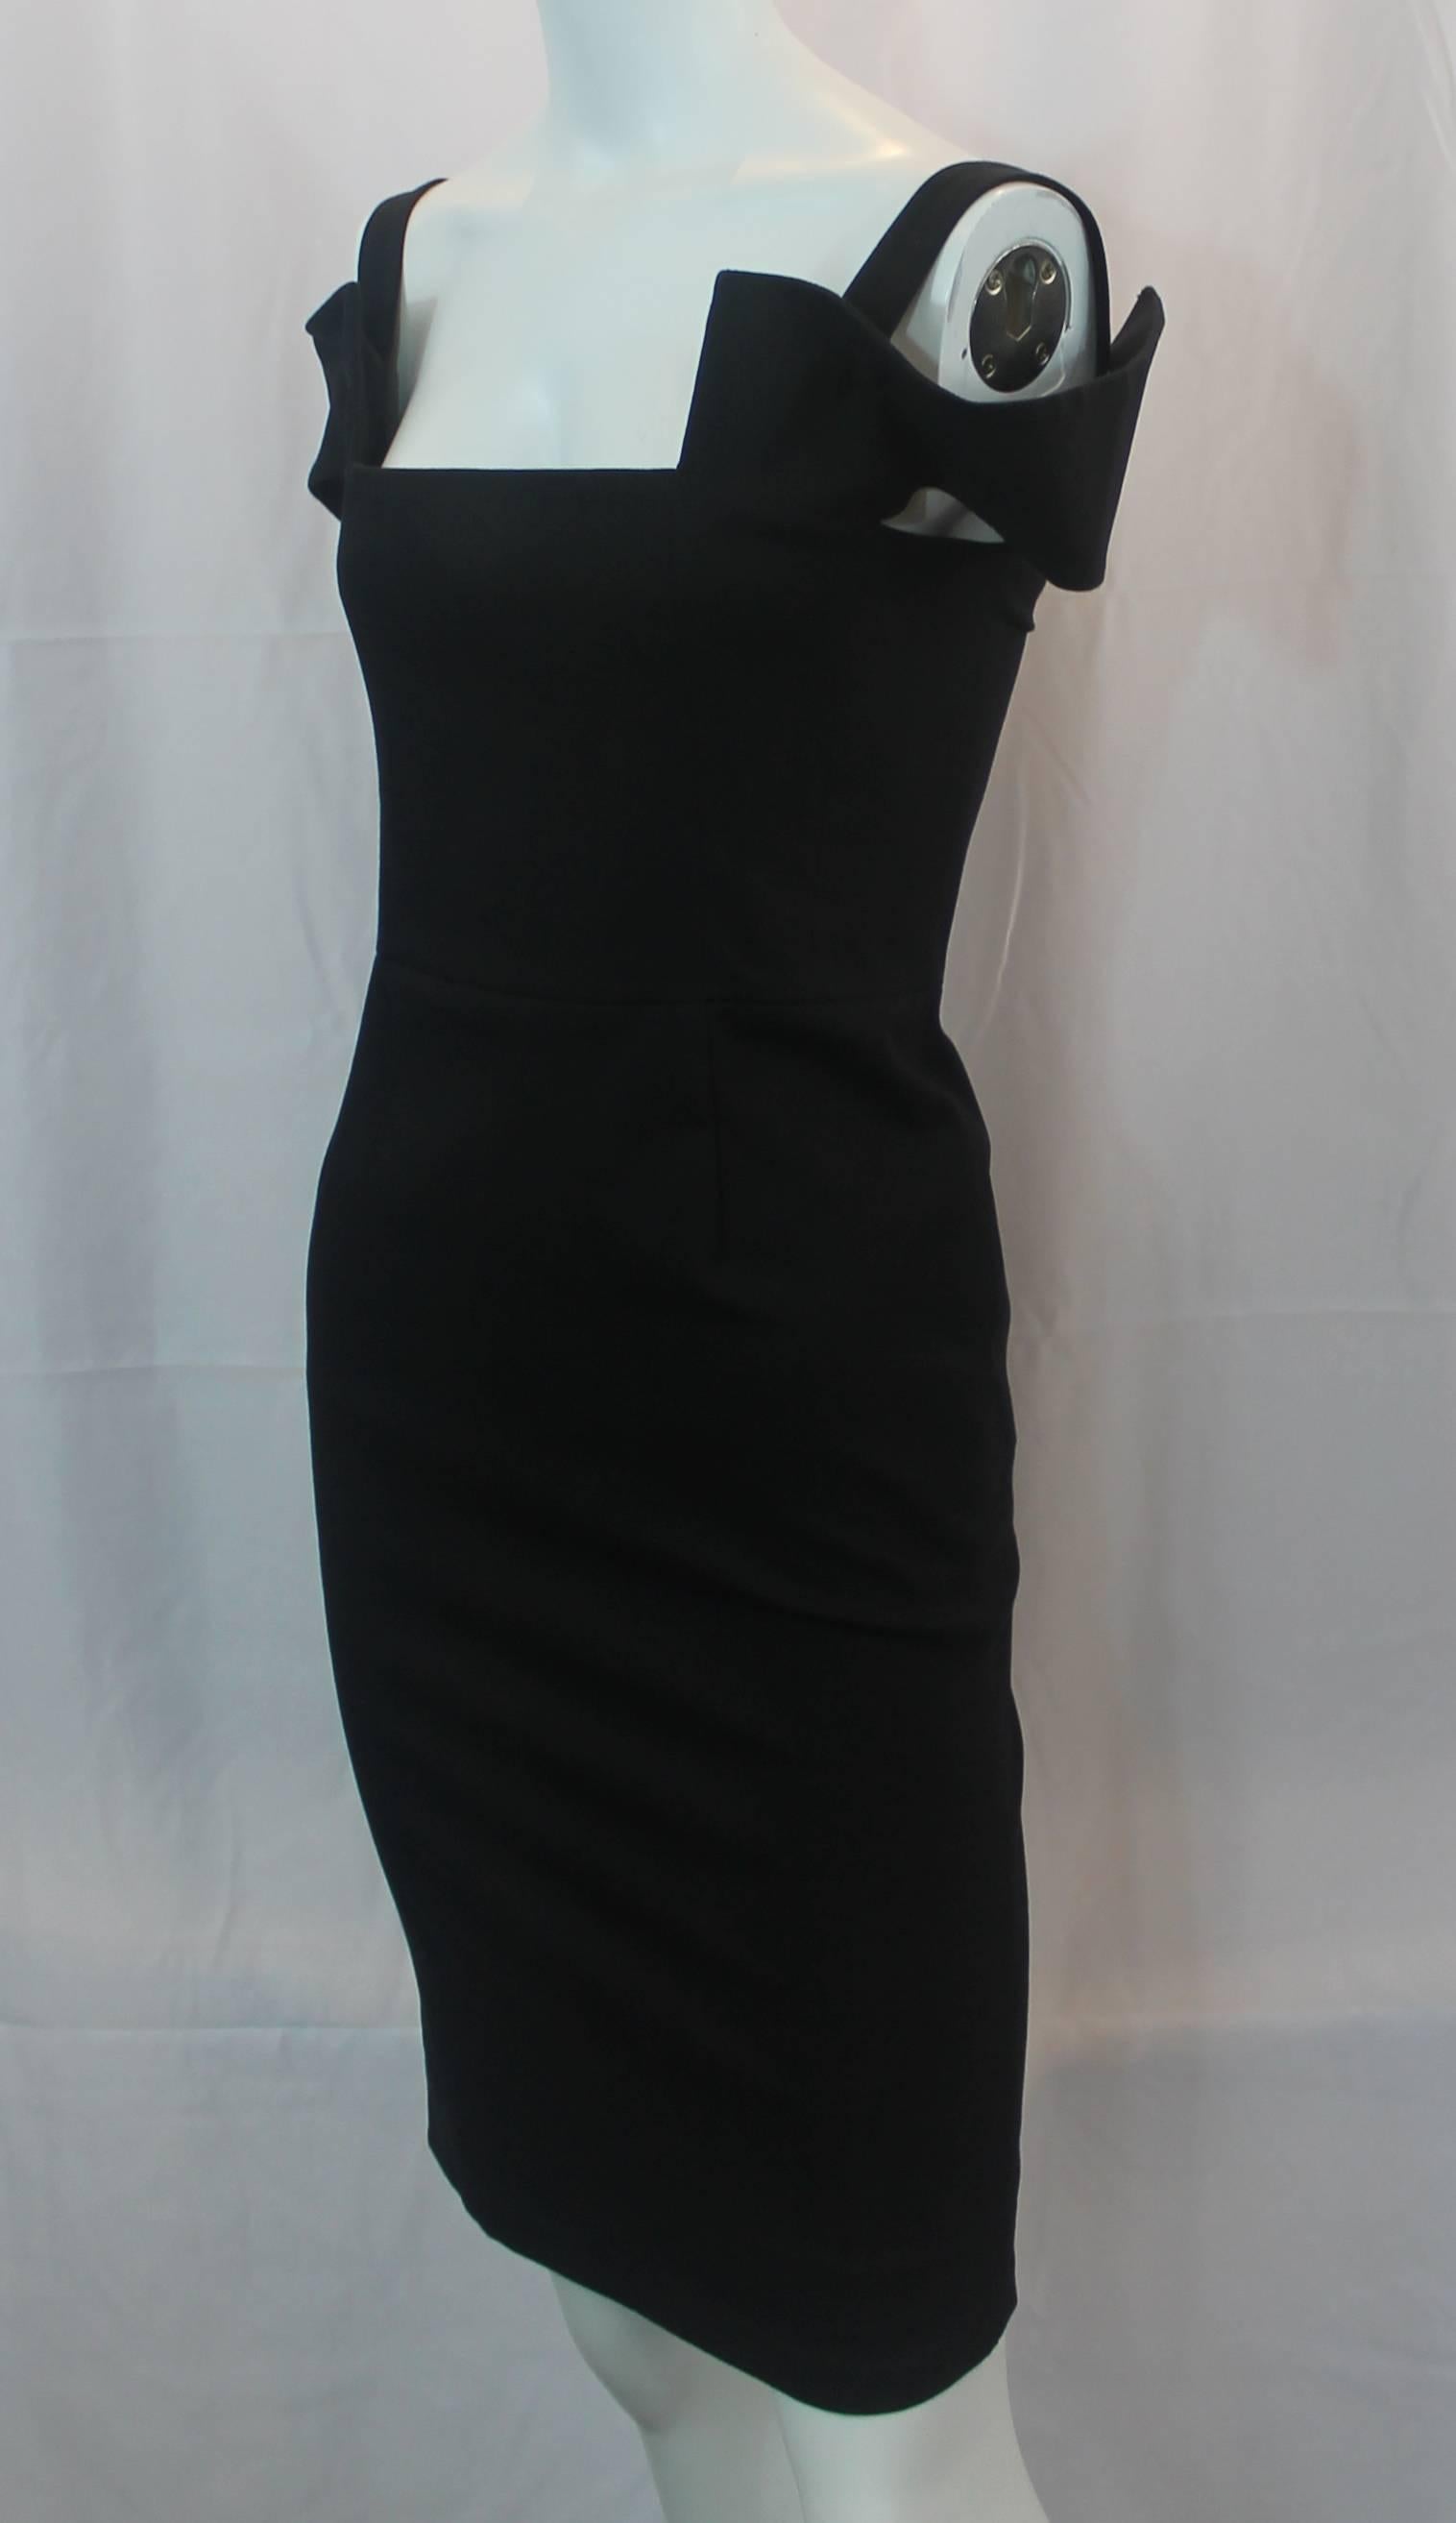 Fendi Black Cotton Blend Tapered Dress with Cutouts - 40. This chic tapered dress has a straight neckline and cutouts on the sleeves. On the back, there is a zipper and a cutout look. This dress is in good condition with faint stains on the dress